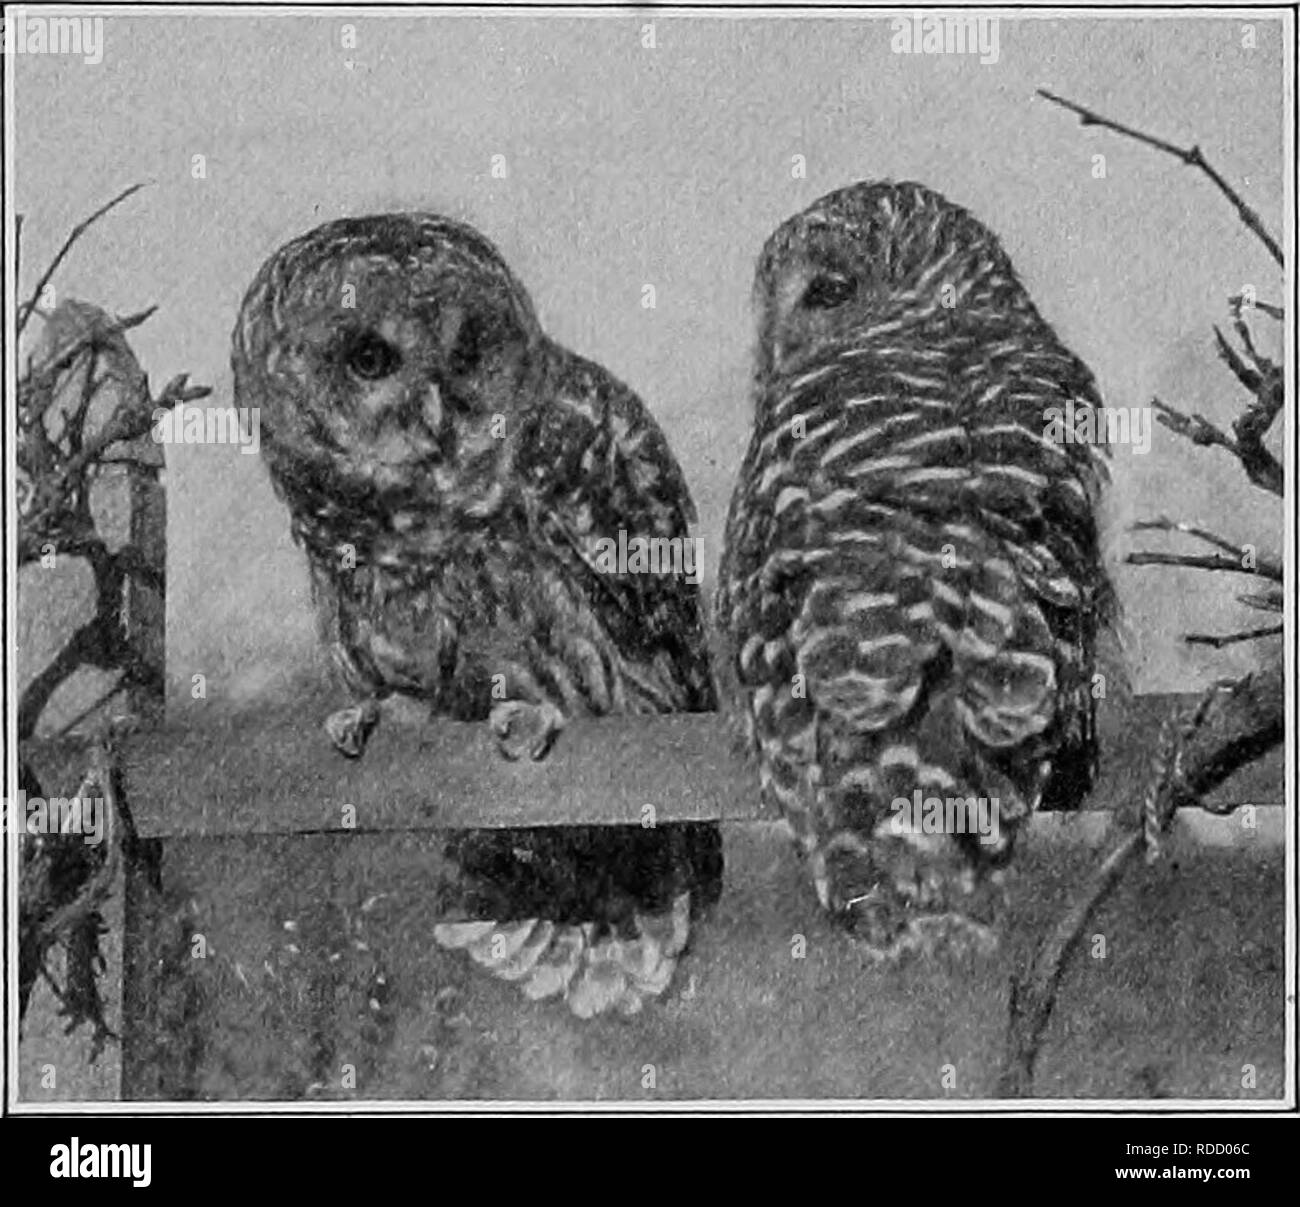 . The American natural history; a foundation of useful knowledge of the higher animals of North America. Natural history. DECLARED TO BE A PEST 41 On the evidence available I am convinced that the Barred Owl does far more harm than good, that it clearly belongs in the class of intolerable bird pests and therefore should be destroyed. The Barred Owl is next in size to the great horned owl. It is from 20 to 22 inches long, heavy bodied, round headed. Photograph and copyright, 1902, by W. L. Underwood. BARRED OWLS. and quite without &quot;horns,&quot; or &quot;ears.&quot; Its head, neck and breas Stock Photo